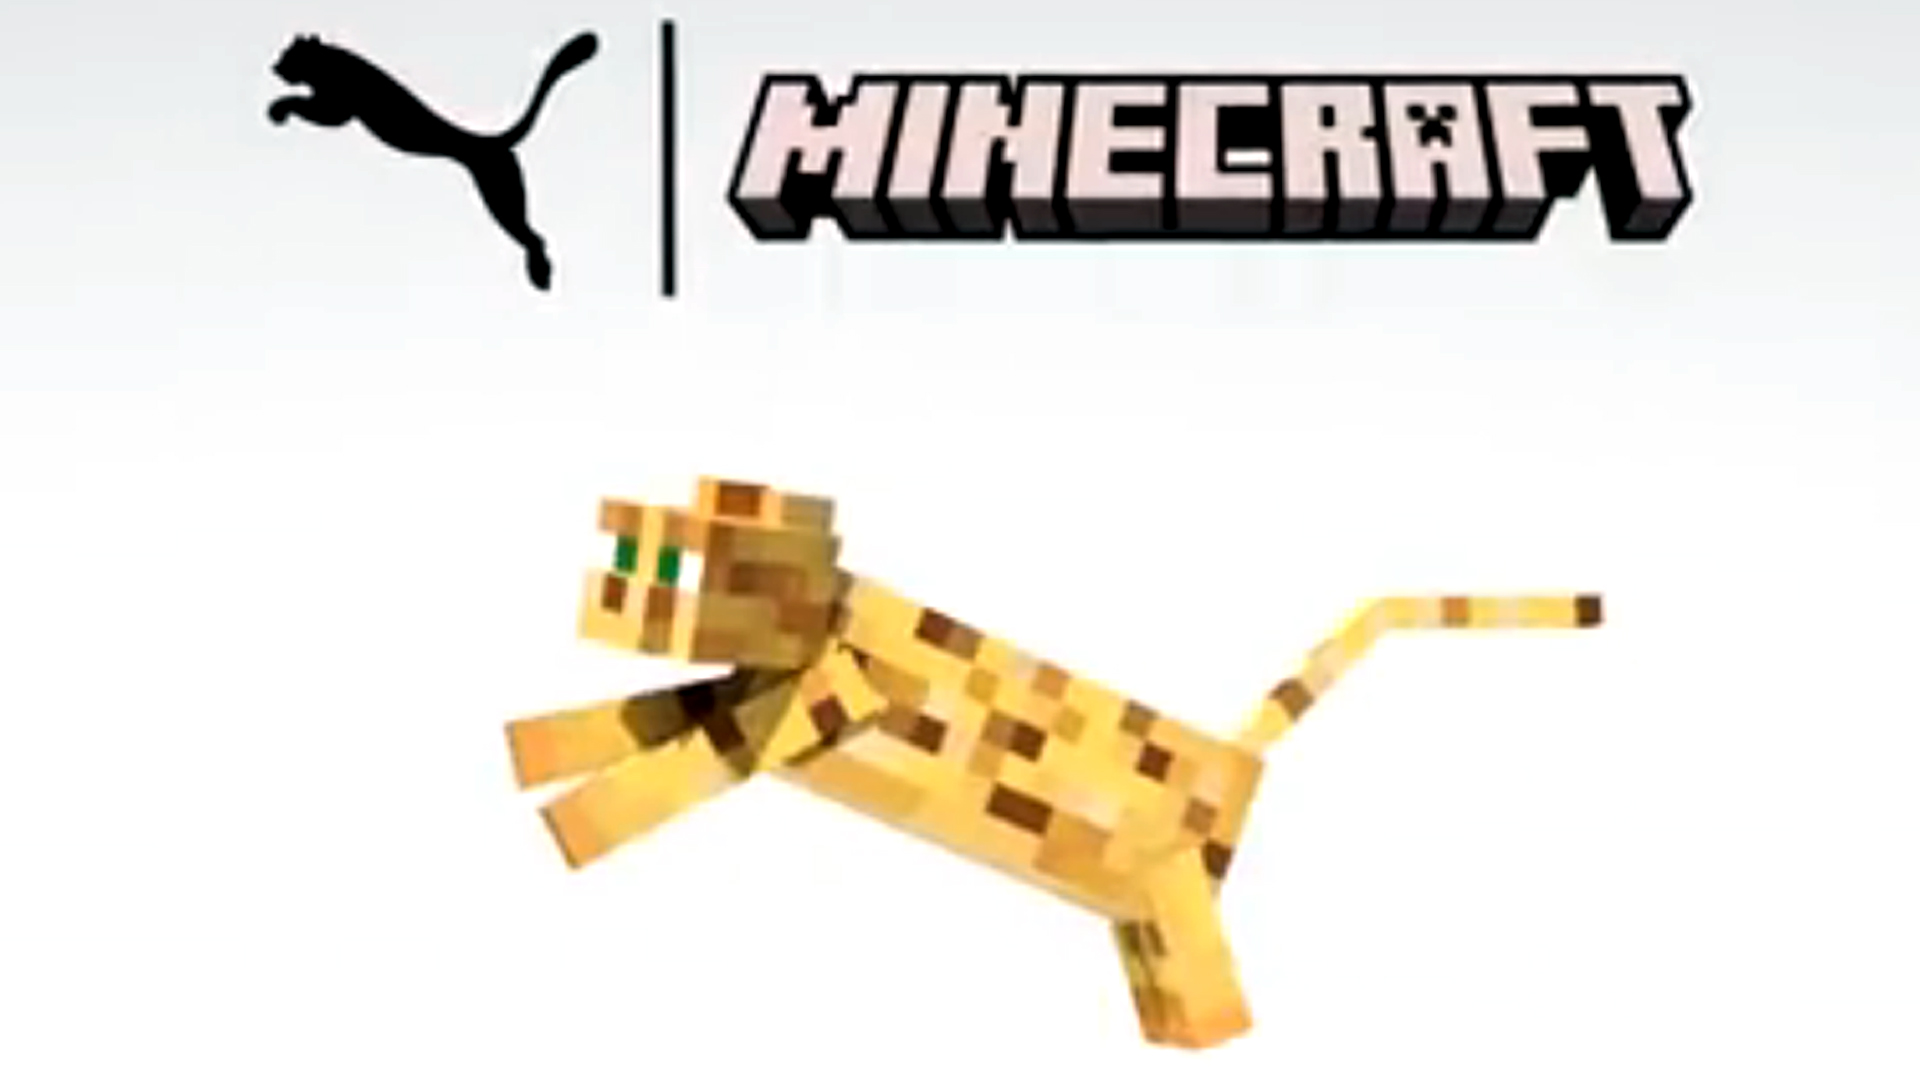 Minecraft is getting a Puma collab for some reason - PCGamesN